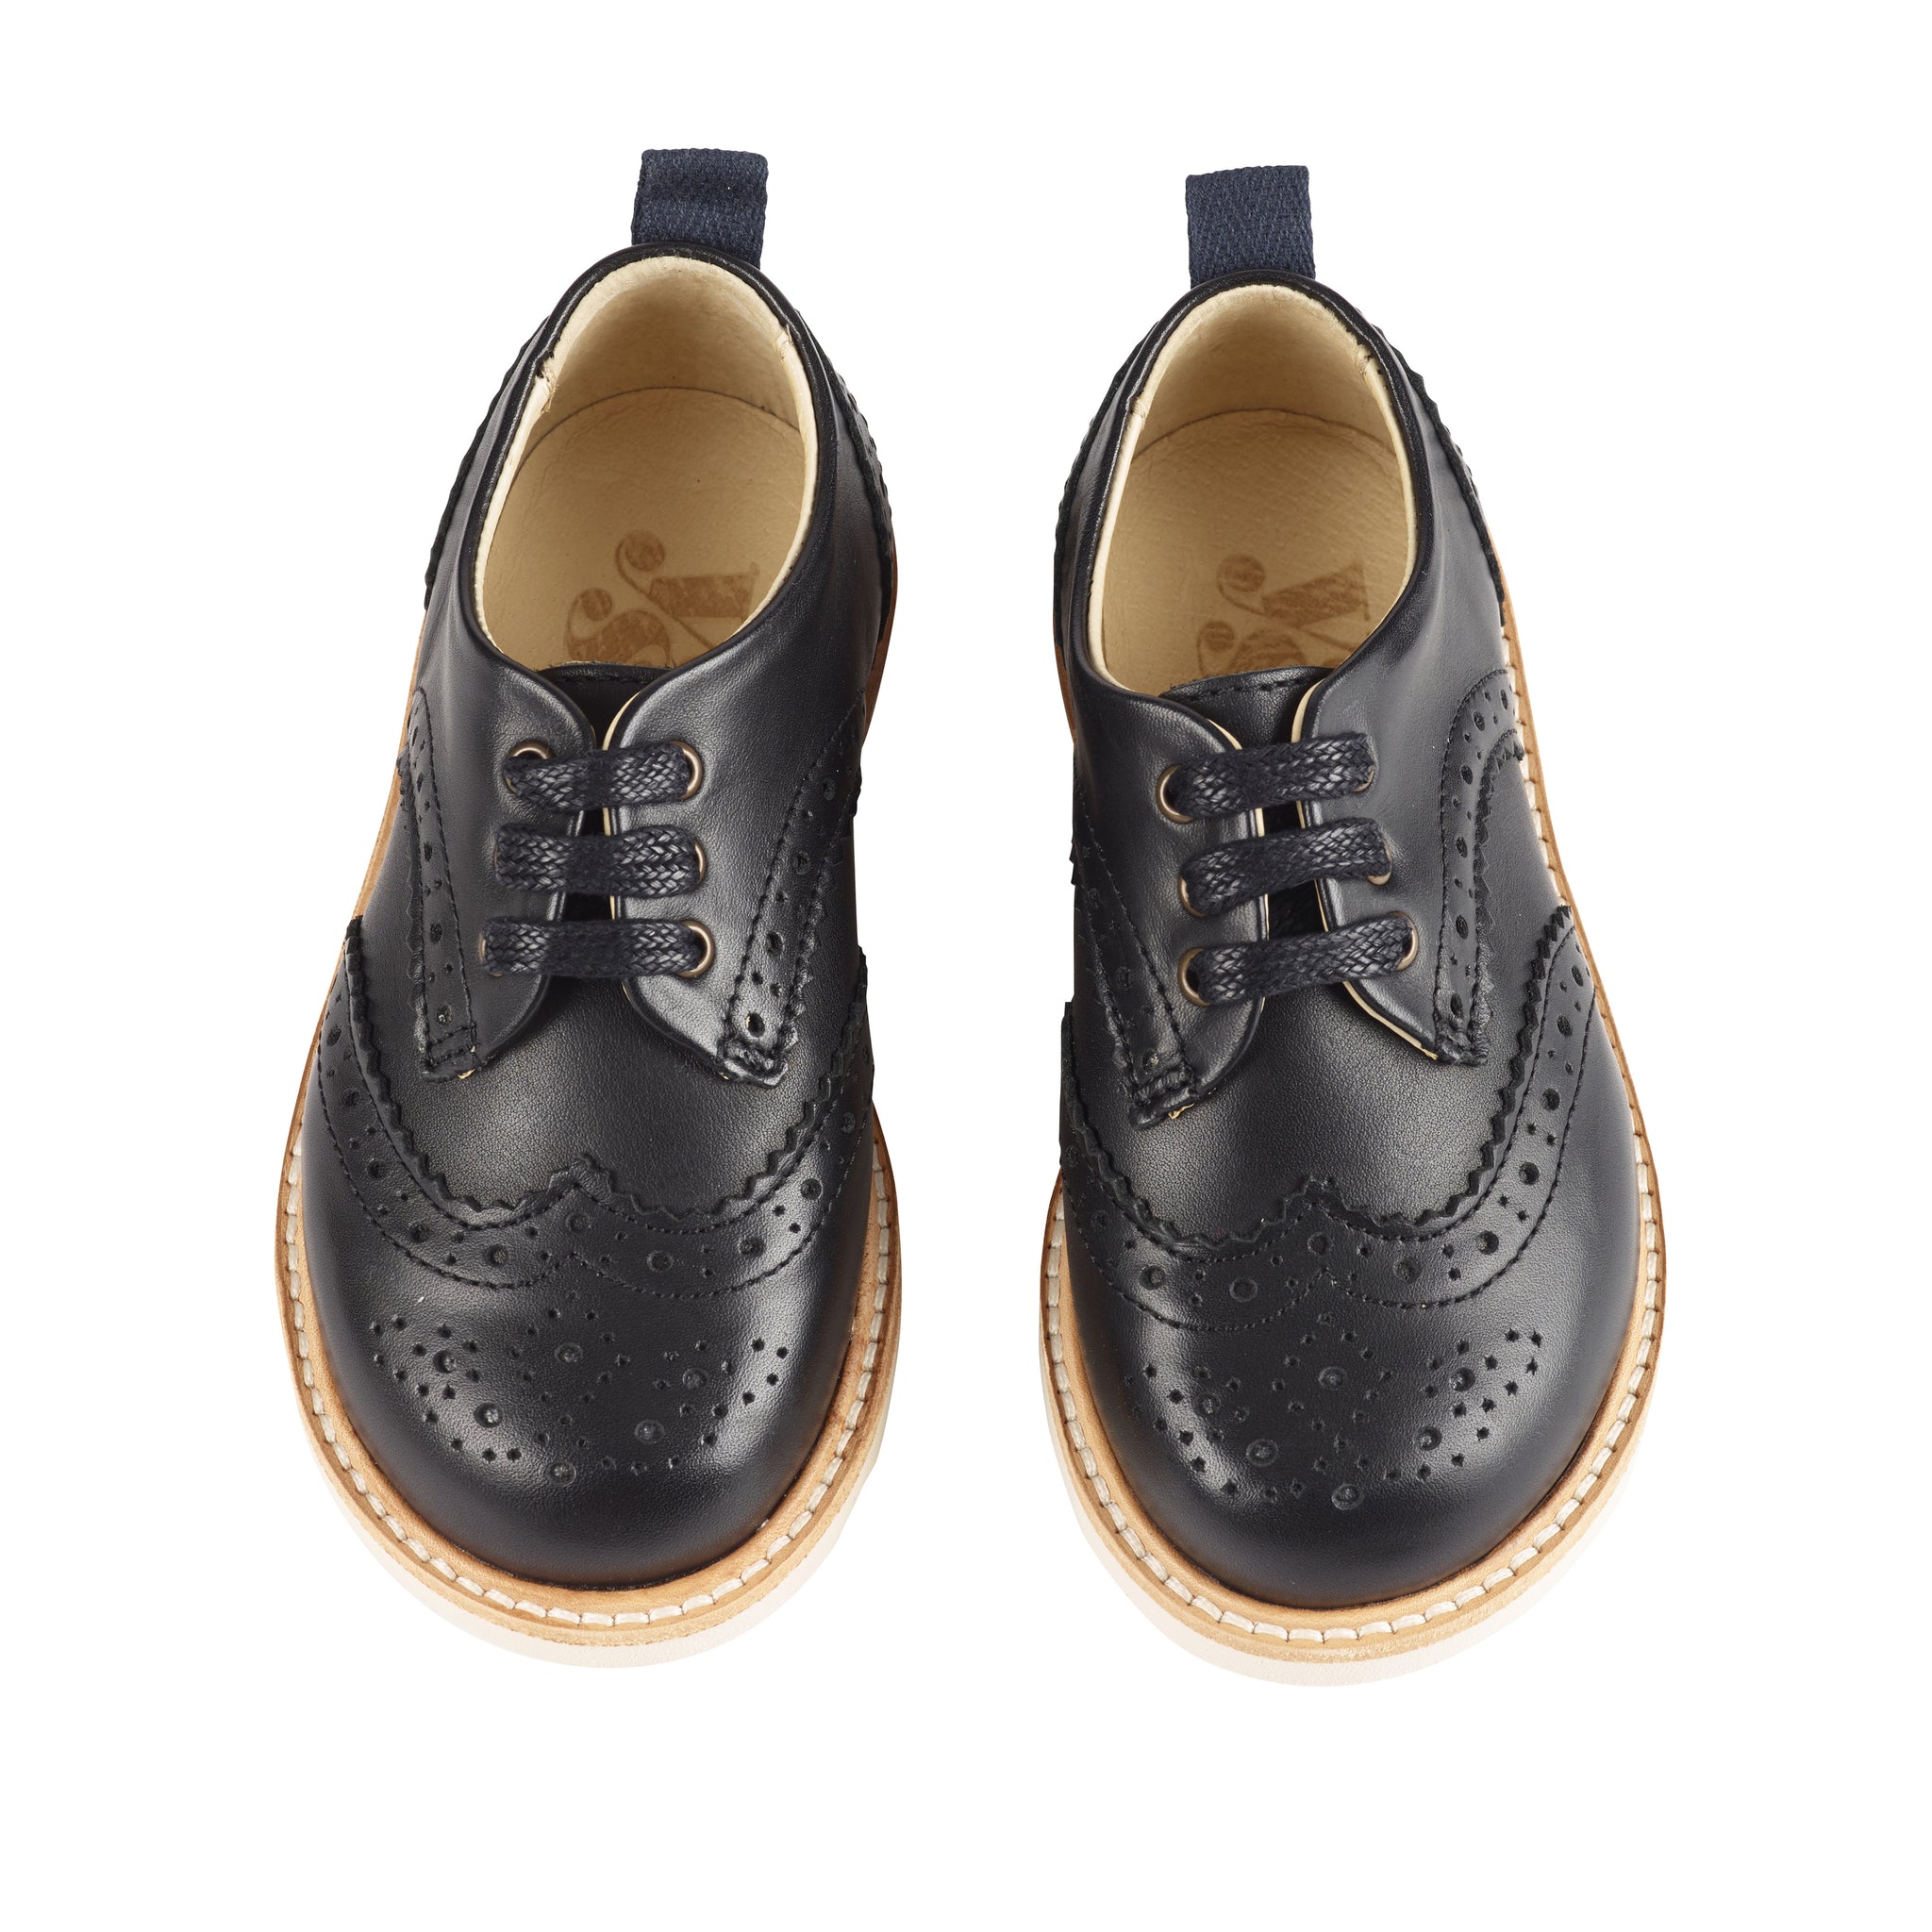 Dr Martens Brando Shoes - Black + White - Casual Shoes from Scorpio Shoes UK